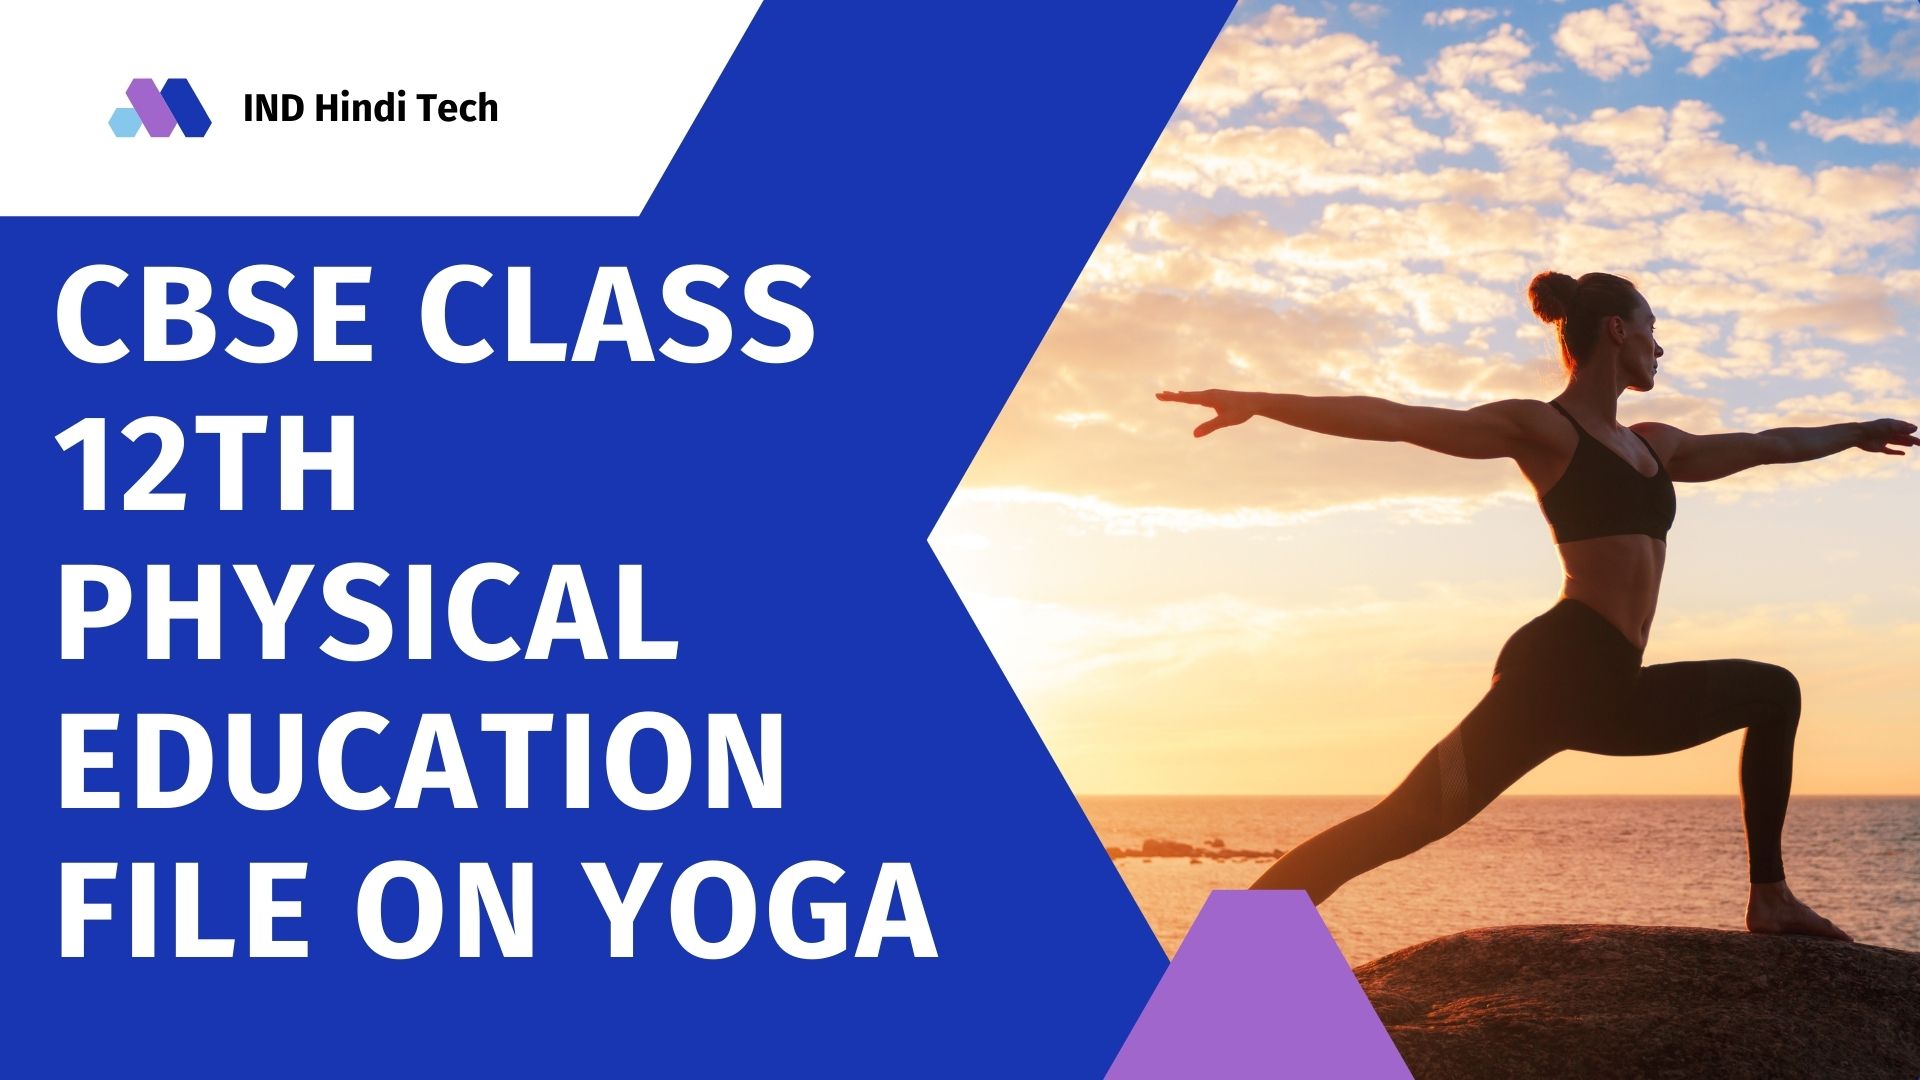 CBSE Class 12th Physical Education File On Yoga